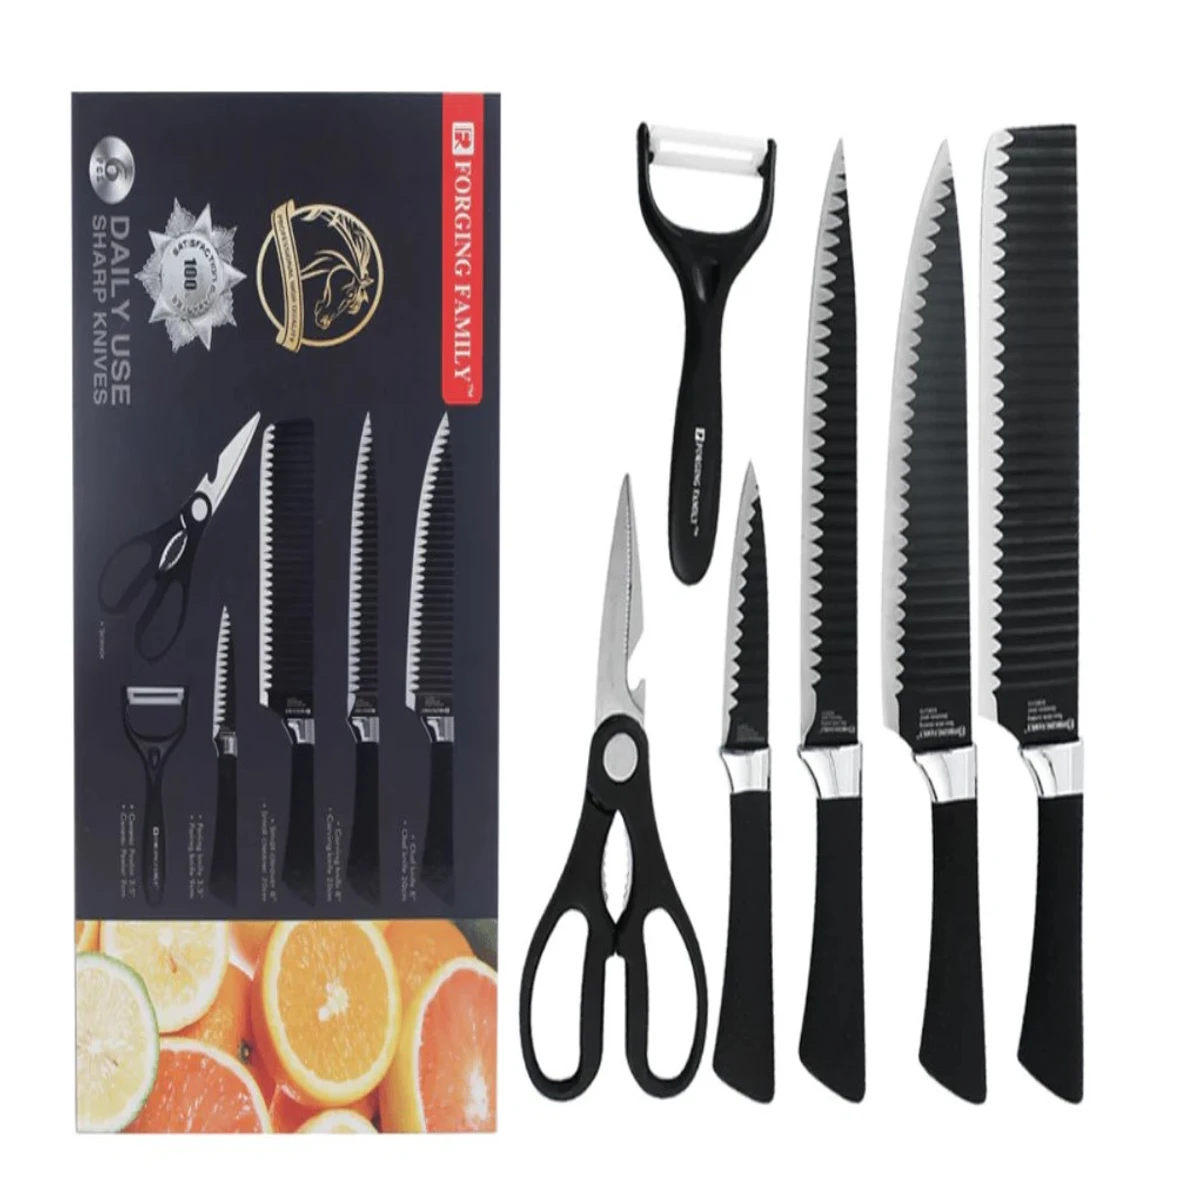 High Quality Kitchen Knife Set 6 in 1